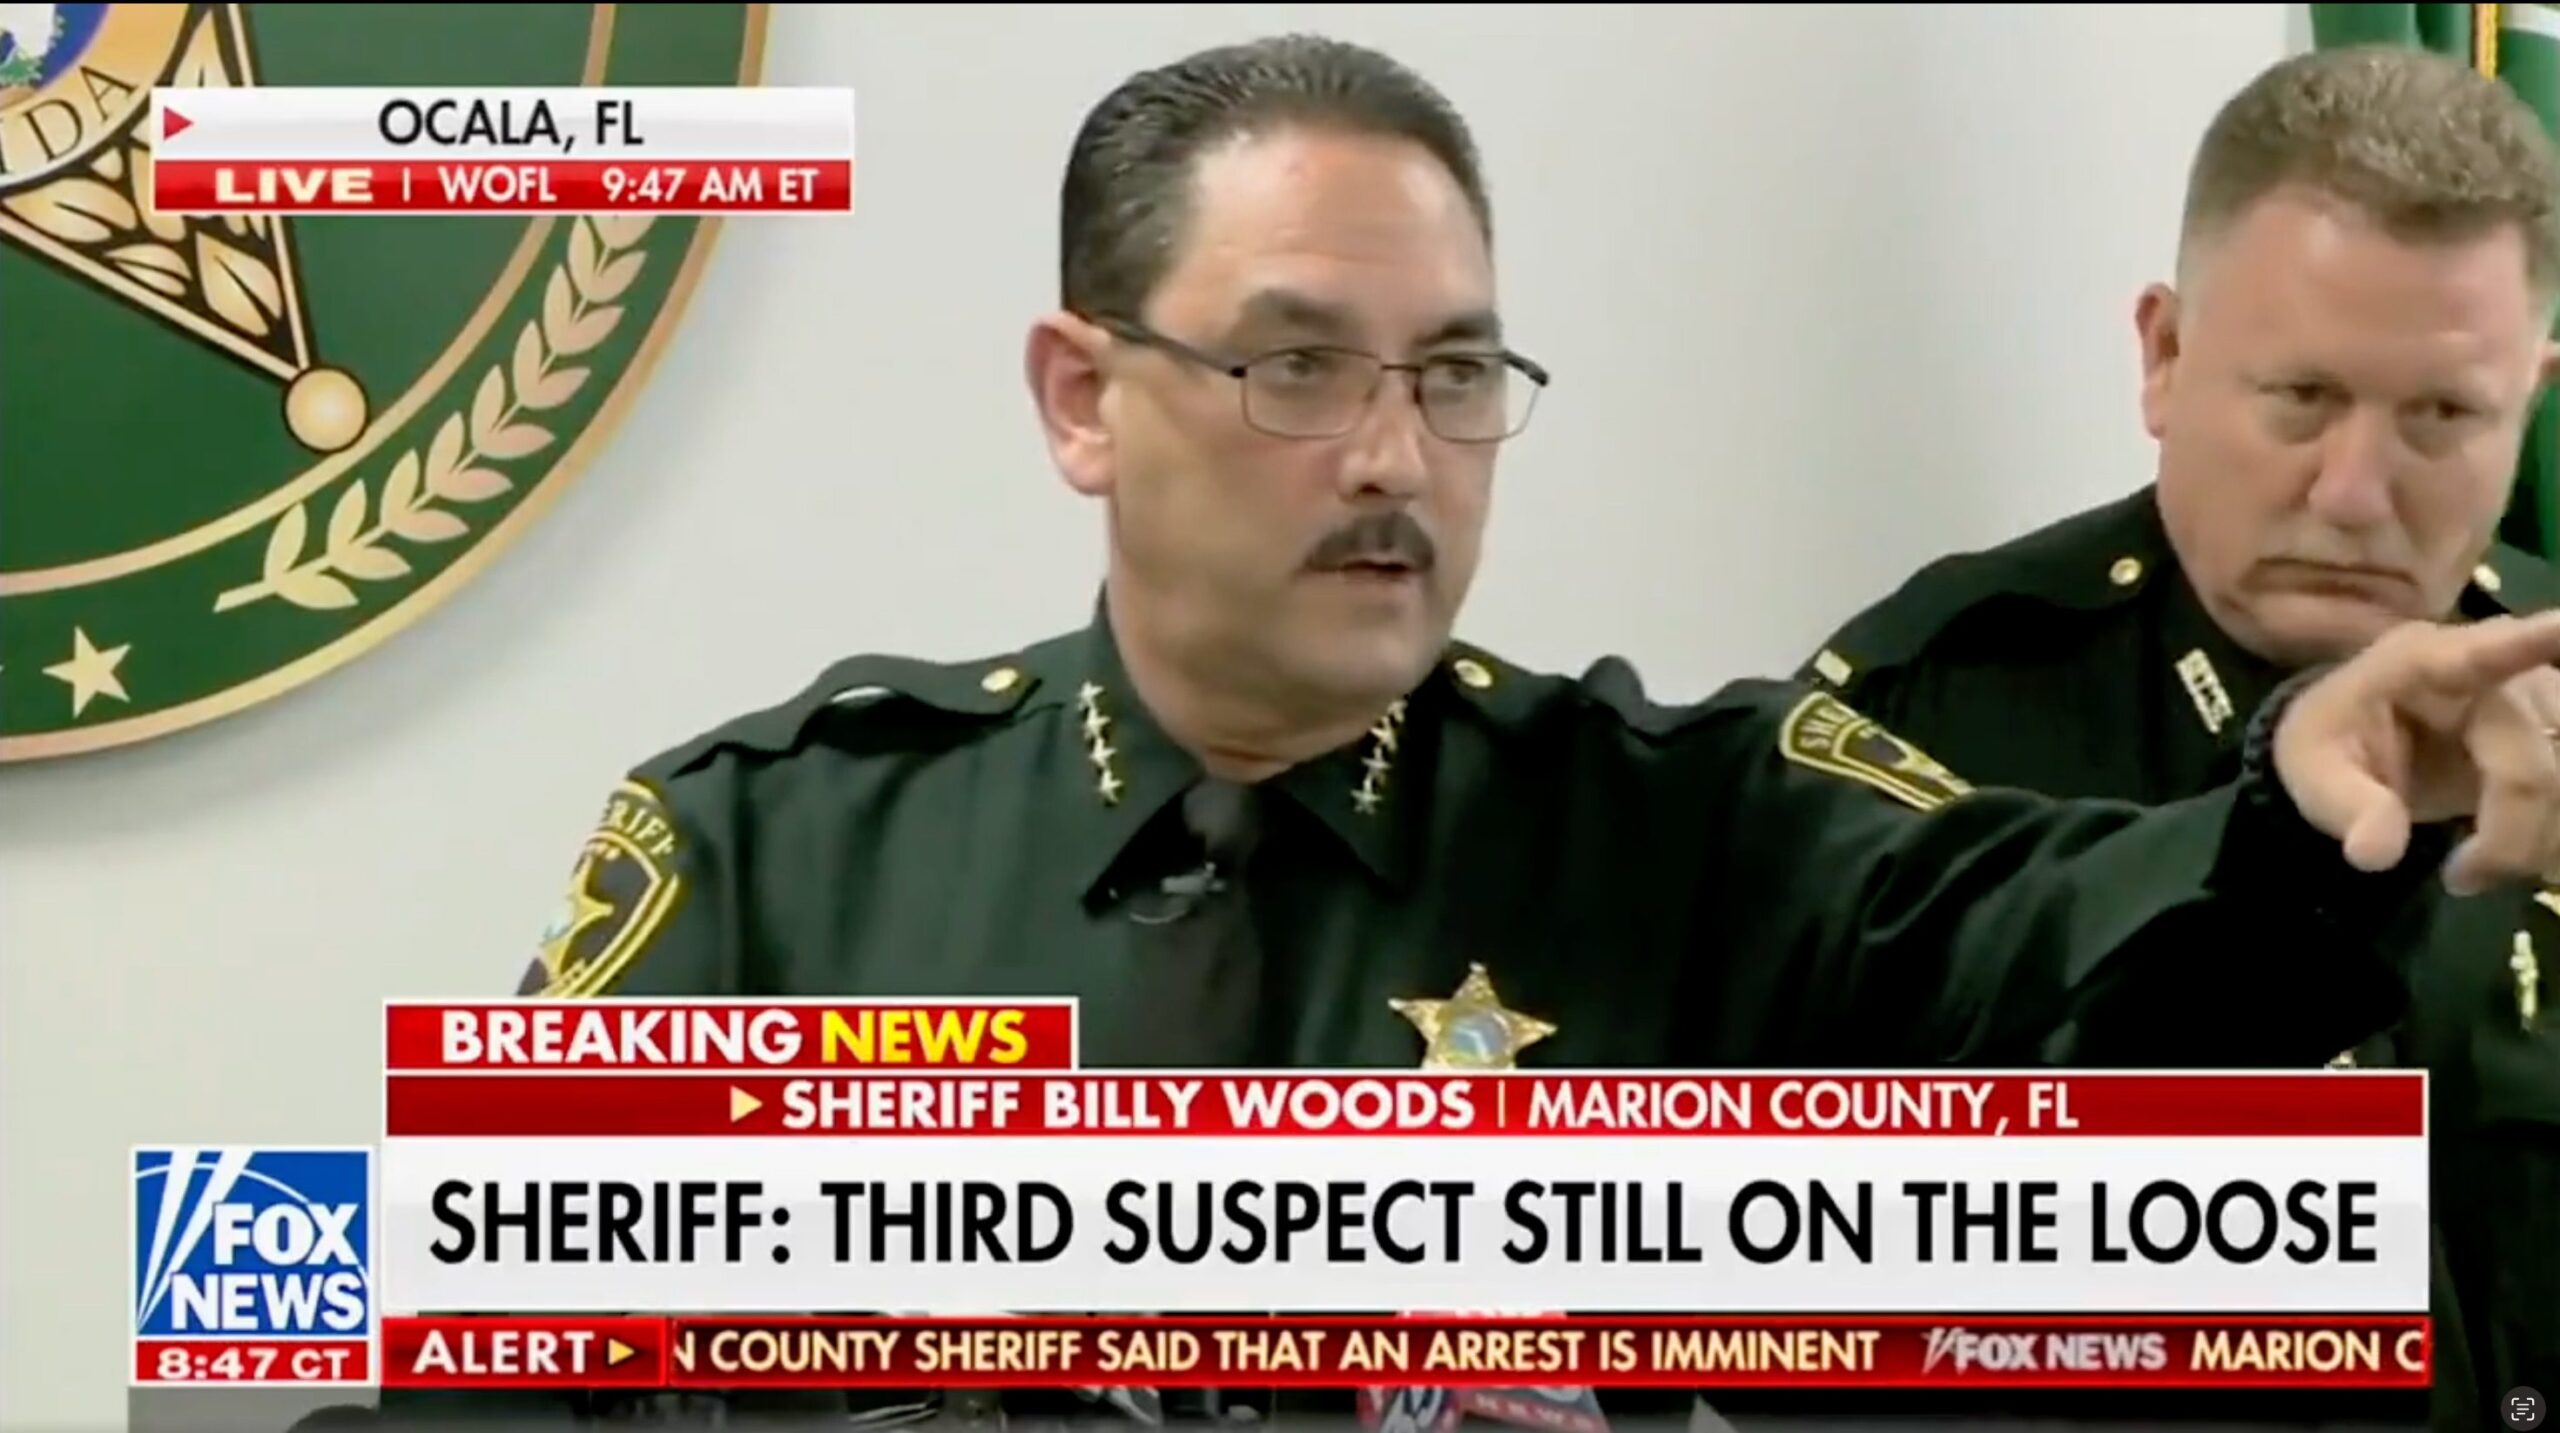 WATCH: Based Florida Sheriff Completely Destroys Liberal Reporter for Invoking Gun Control During Press Conference After Murder of Teens in His County – Gives Rousing Defense of 2nd Amendment! (VIDEO)